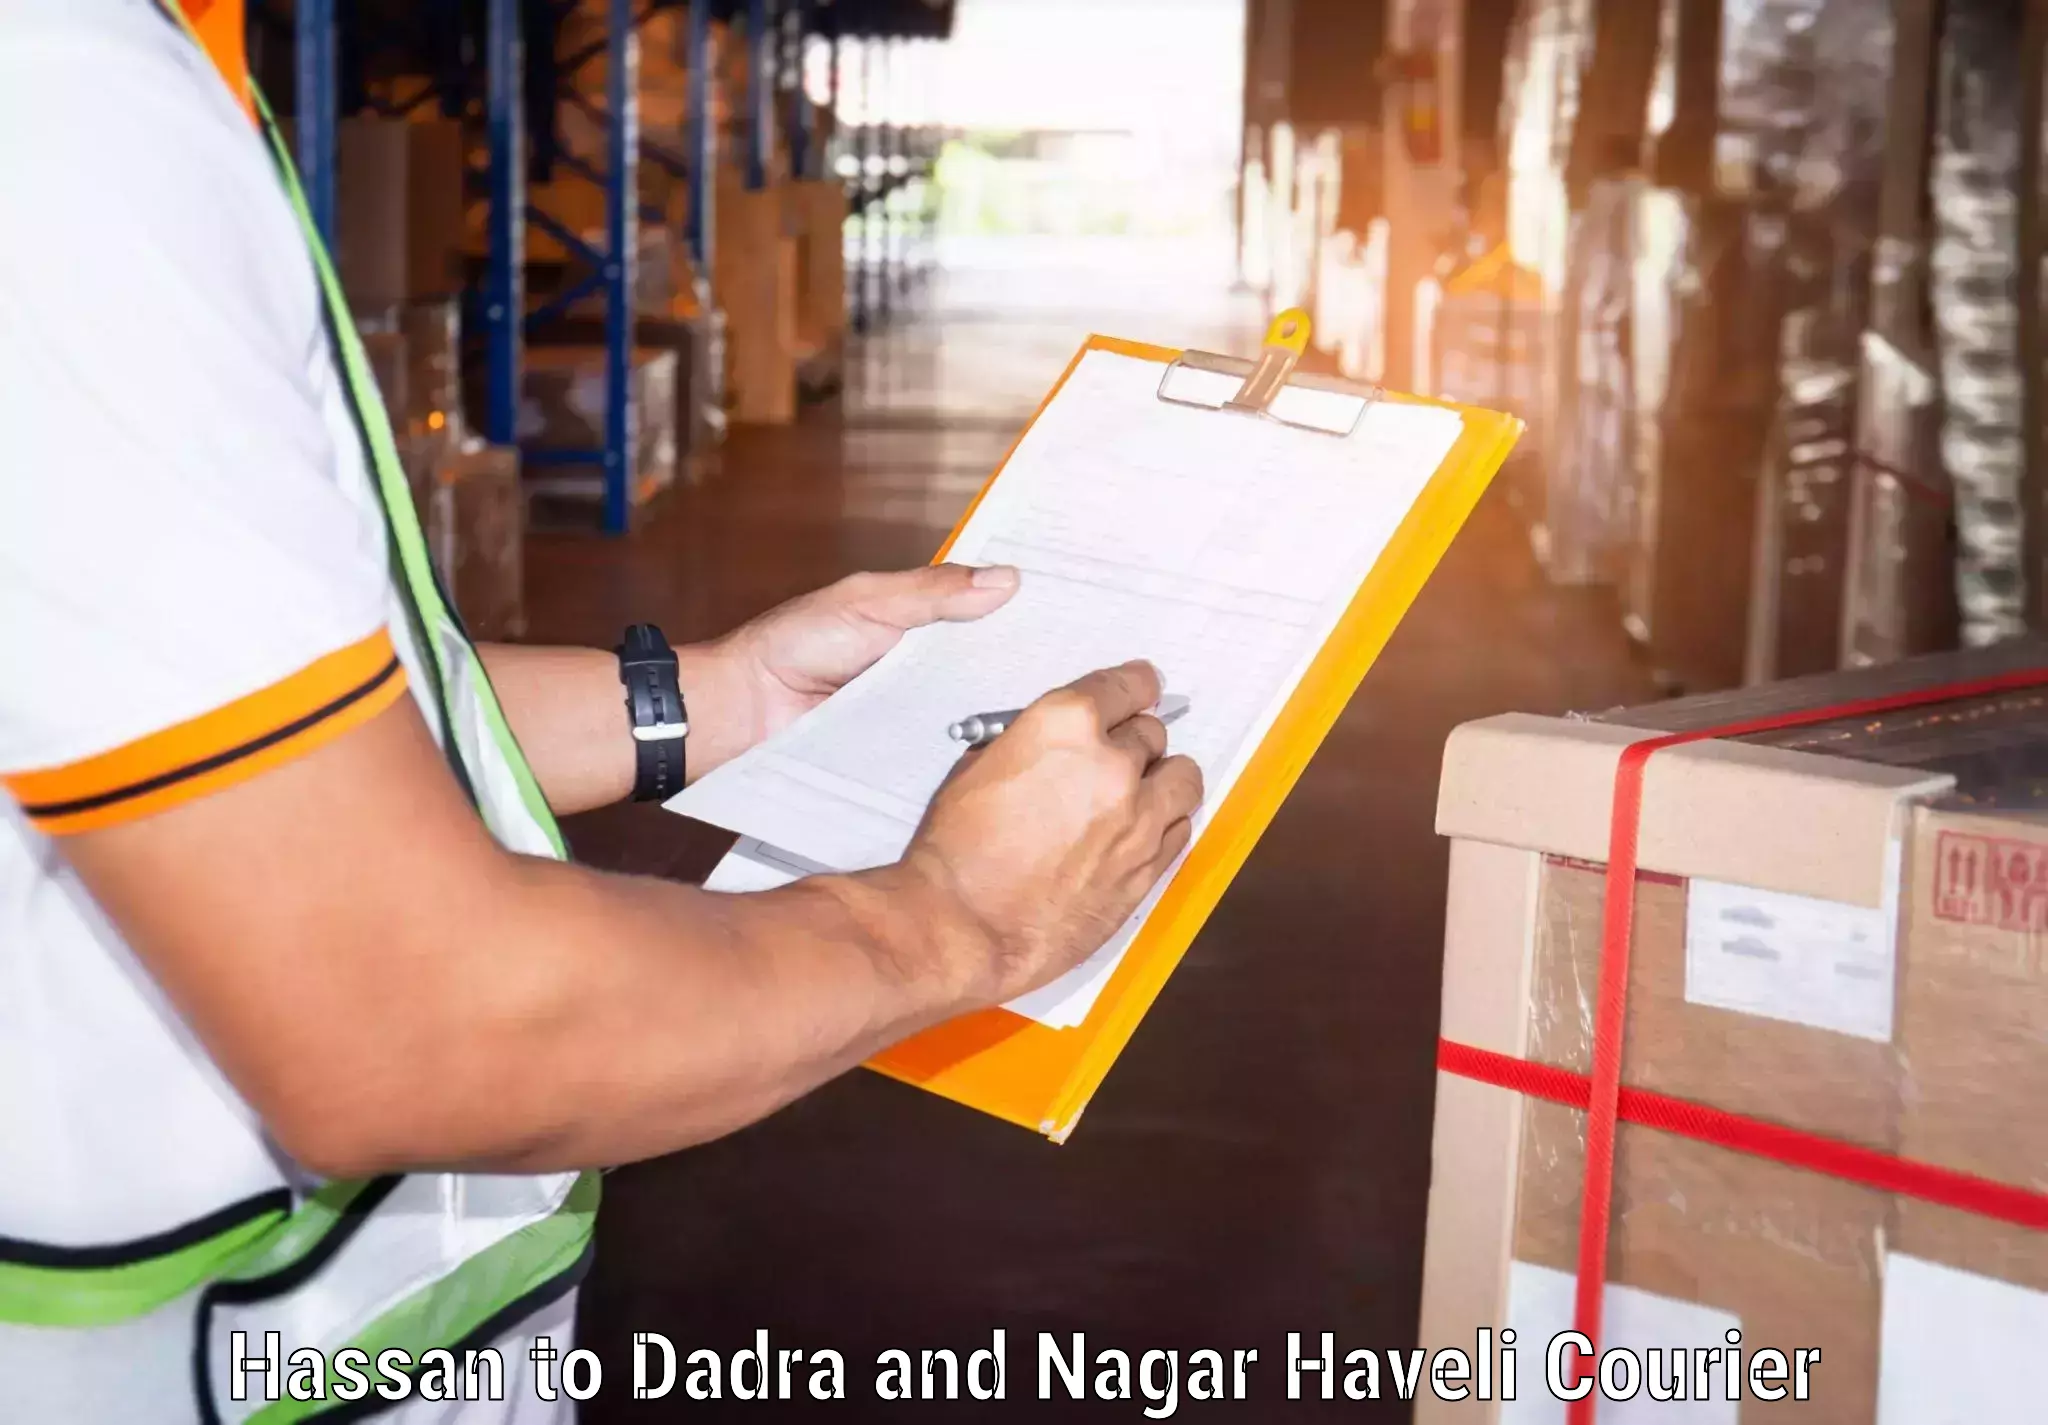 Delivery service partnership Hassan to Dadra and Nagar Haveli